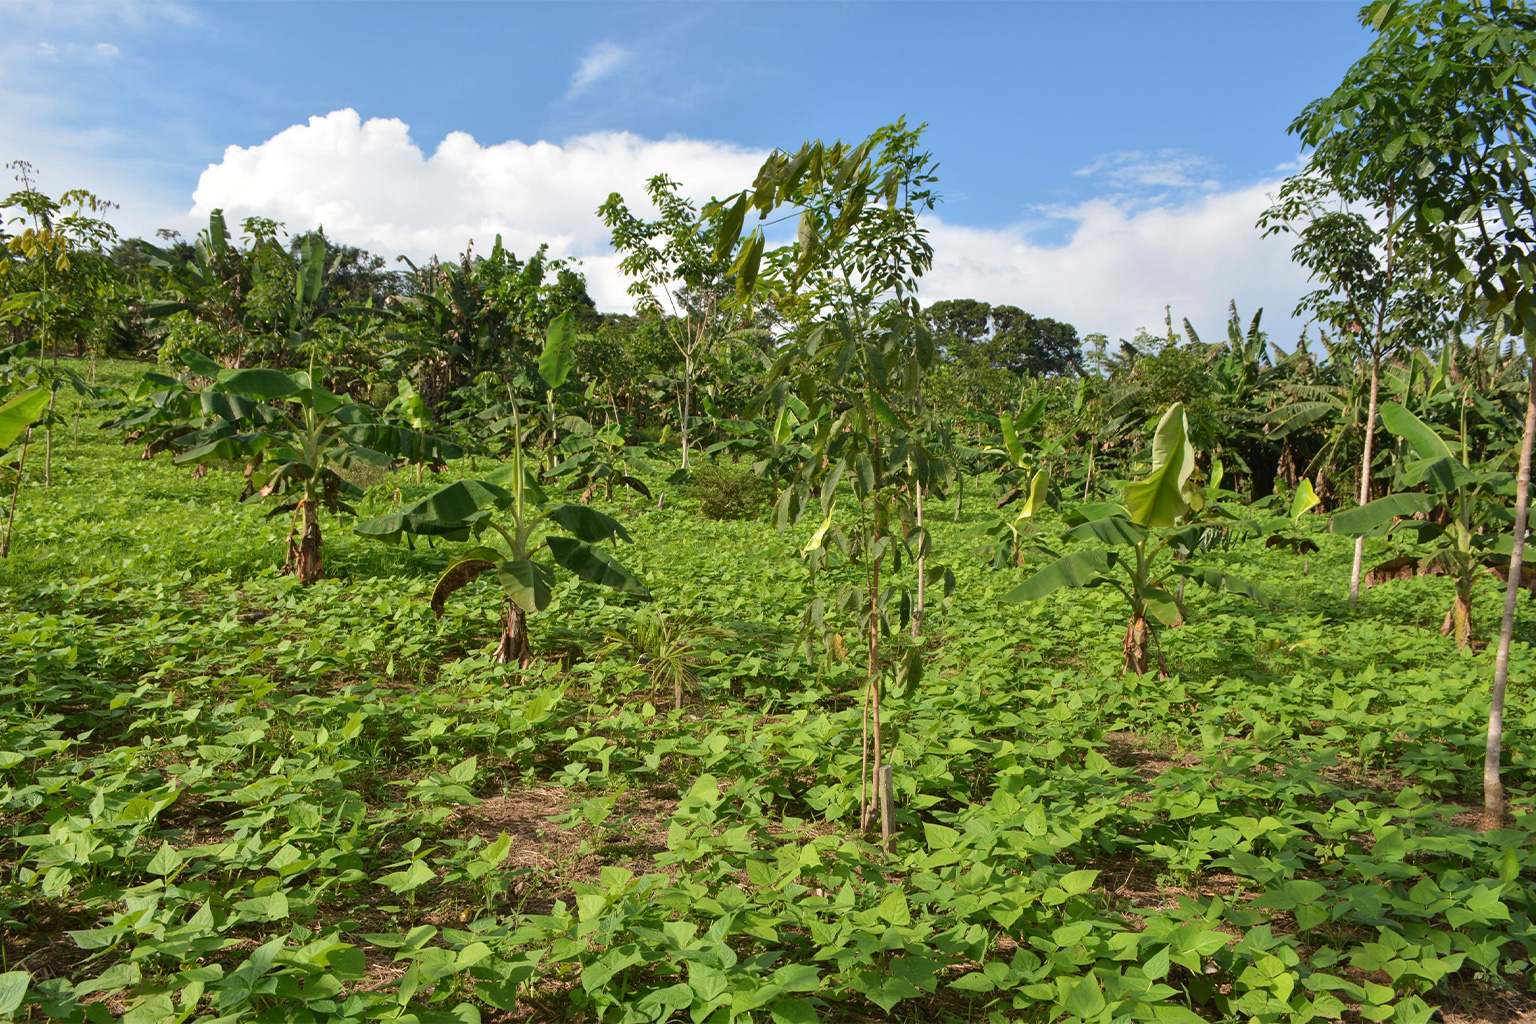 An agroforestry system mixes bananas, beans, and rubber trees.